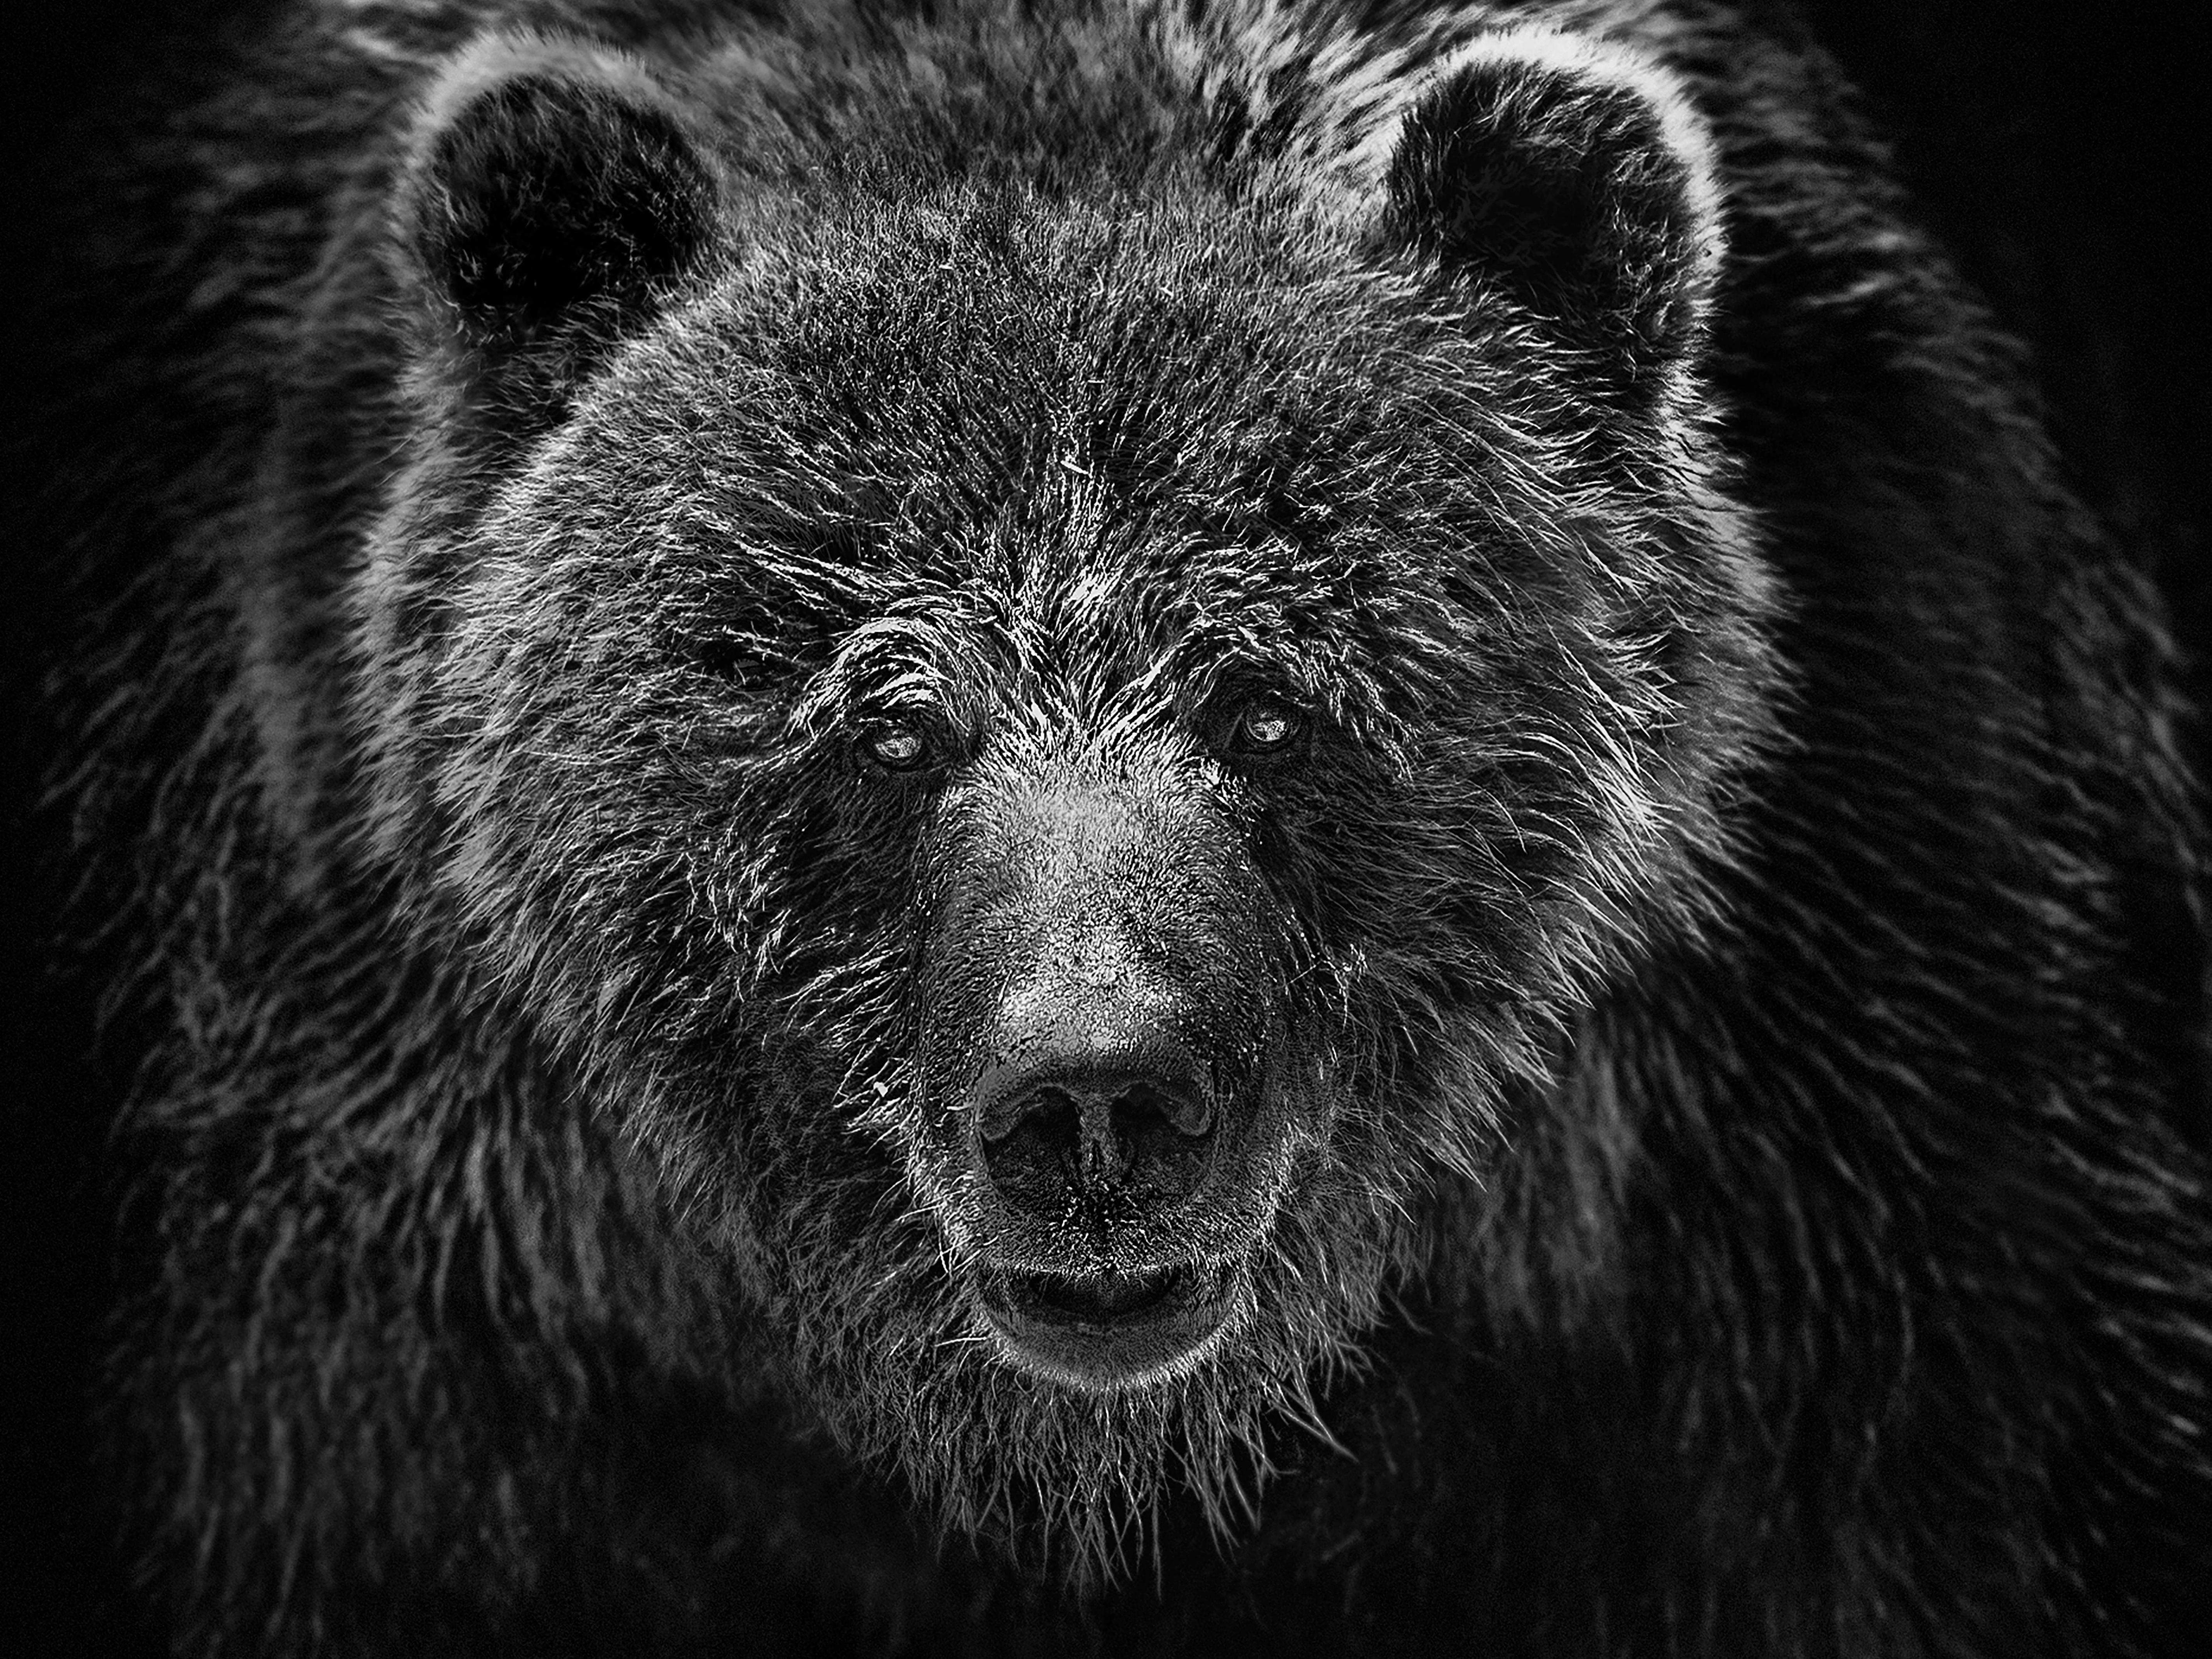 Shane Russeck Animal Print - "Grizzly Portrait" 36x48 - Black and White Fine Art  Photography Grizzly Bear 